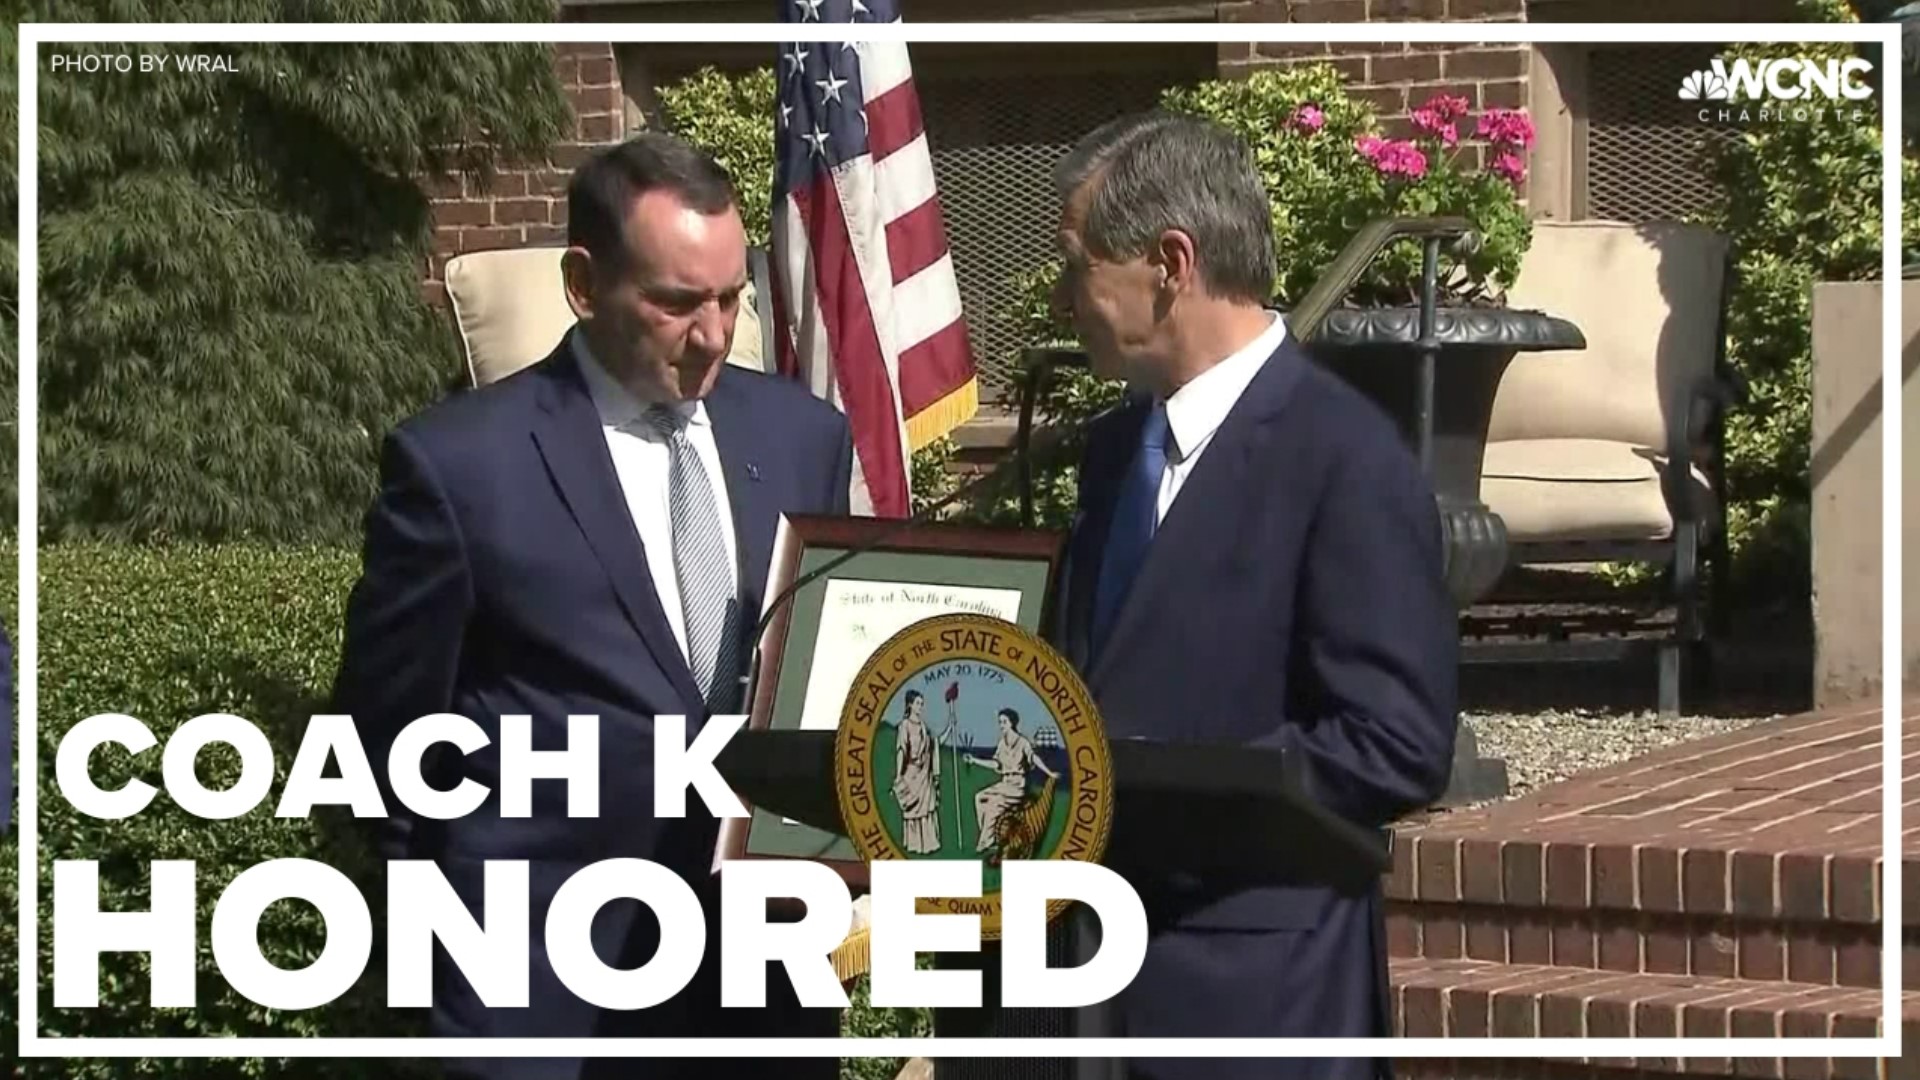 The Order of the Long Leaf Pine is presented to North Carolina's most outstanding citizens to honor their contributions to their communities.